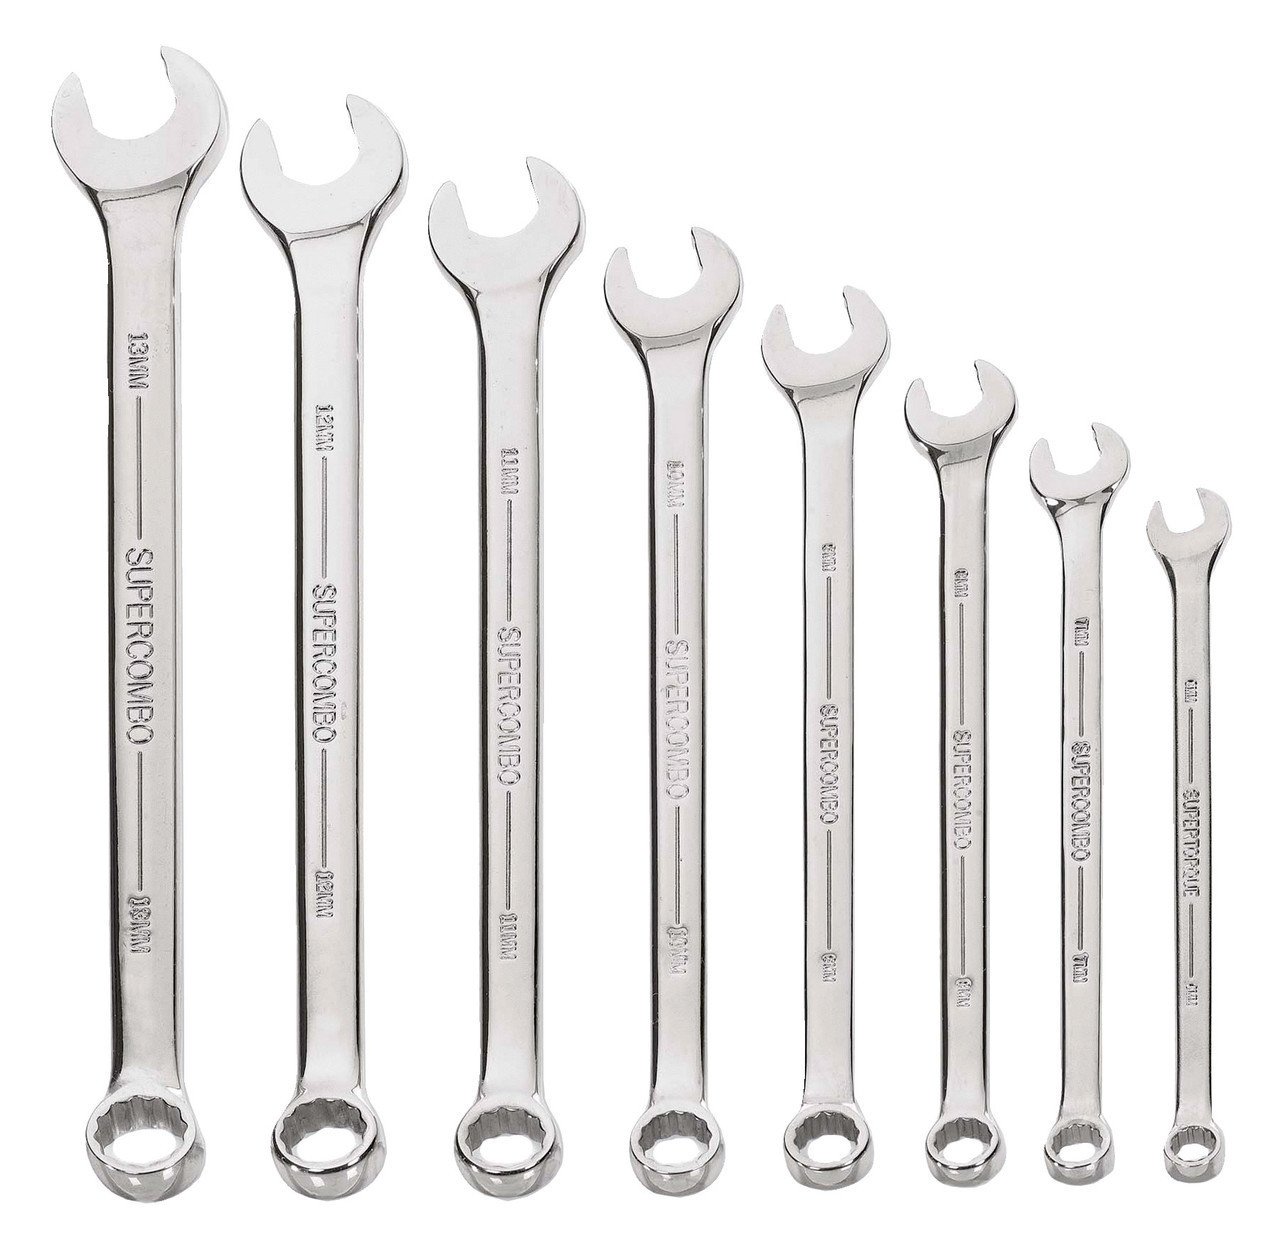 6-13MM Williams Polished Chrome SUPERCOMBO Combination Wrench Set 8 Pcs Set in Pouch - JHWMWS-1B